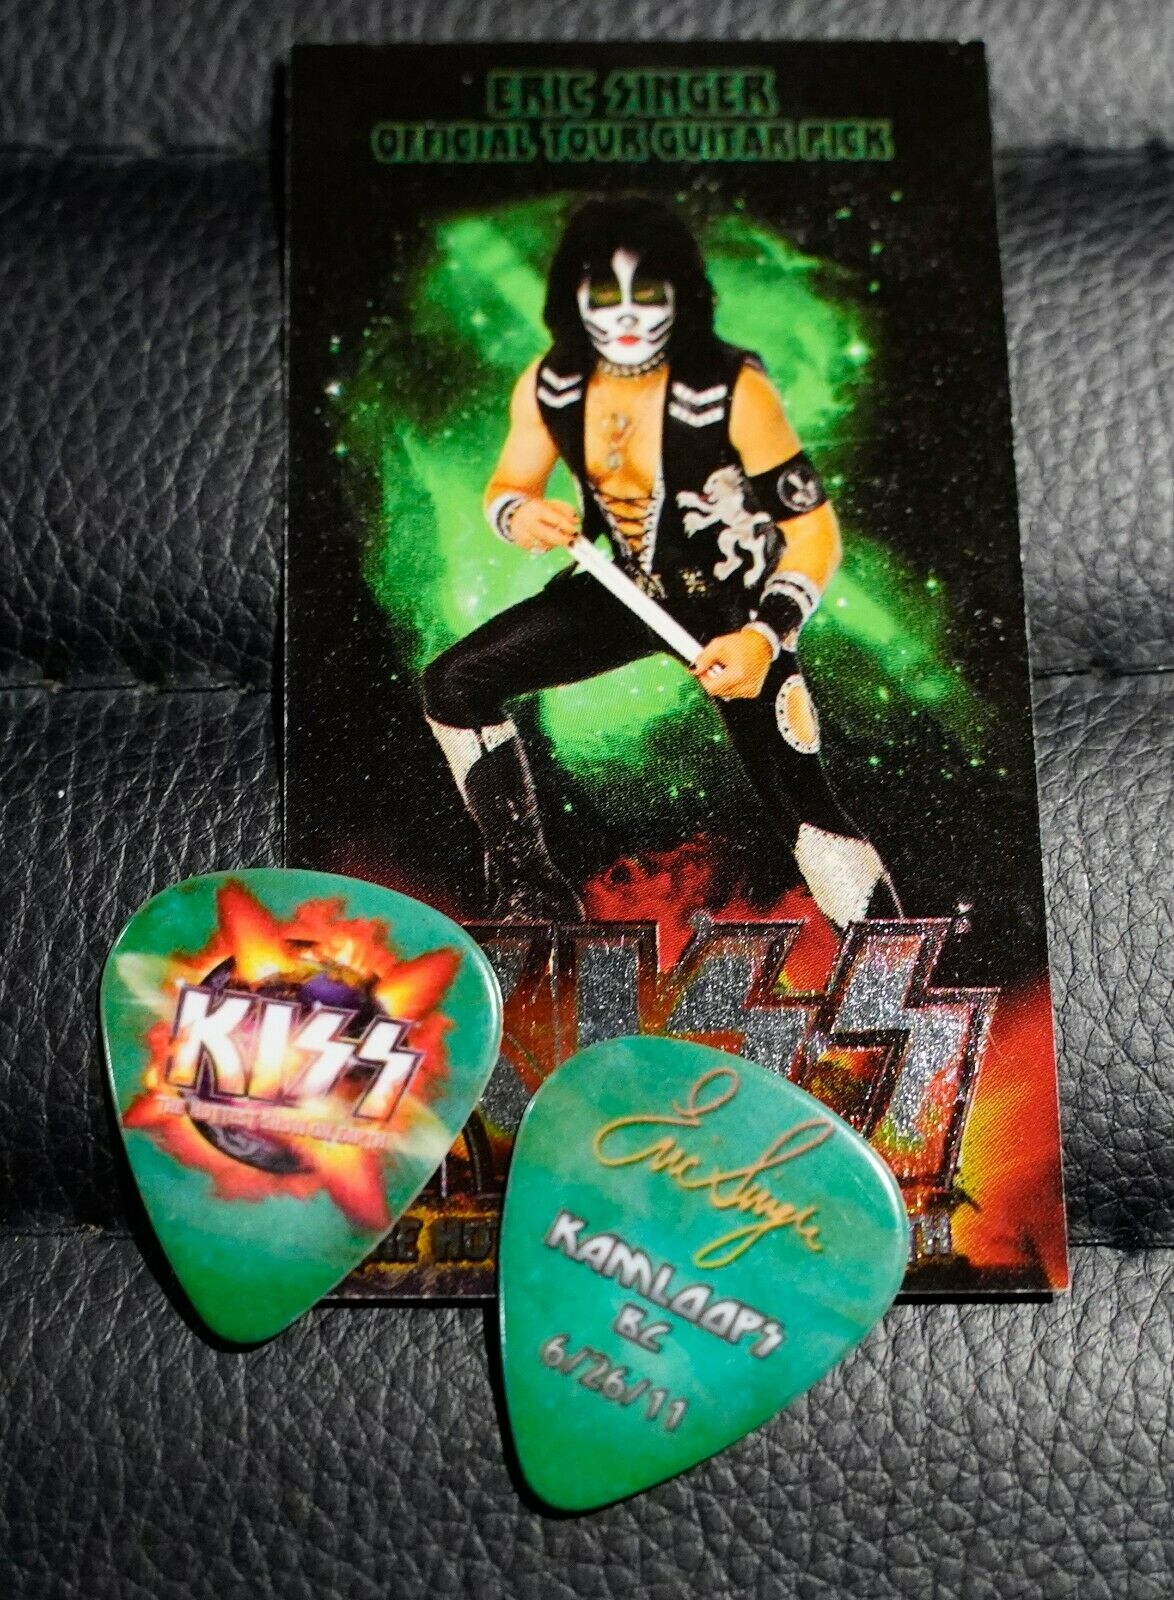 Kiss 062611 Kamloops Eric Singer Guitar Pick Hottest Show Earth Tour